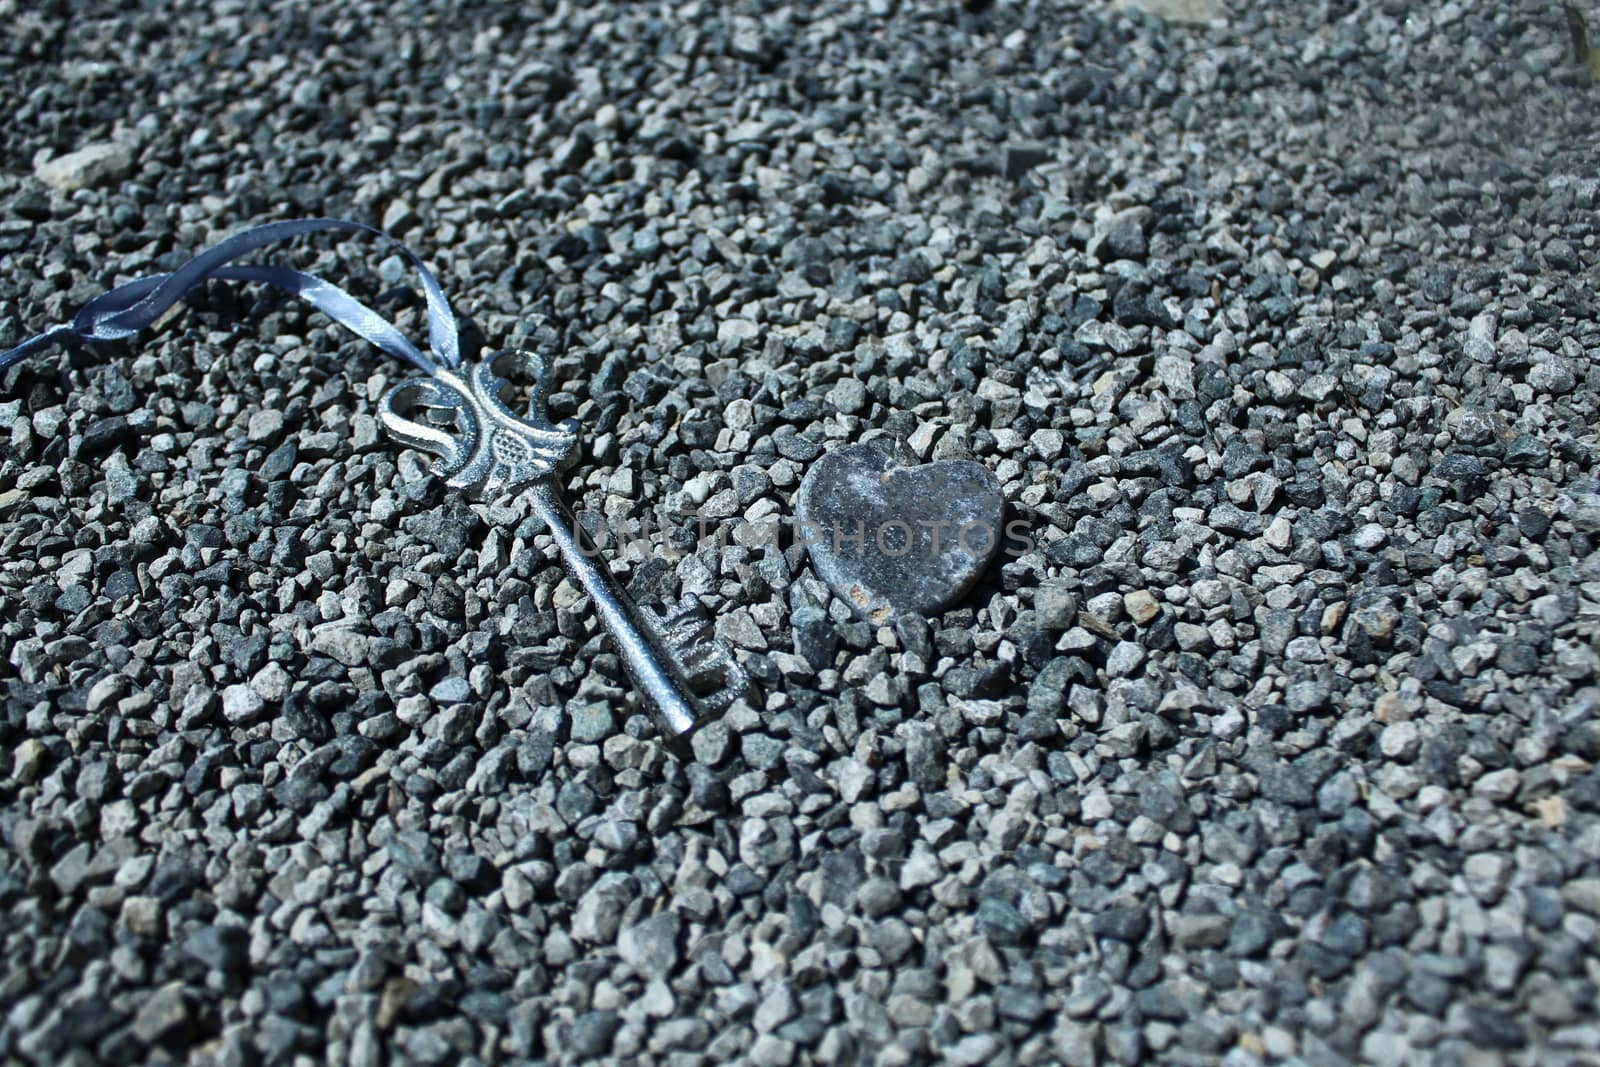 The picture shows a key and a heart of stone.